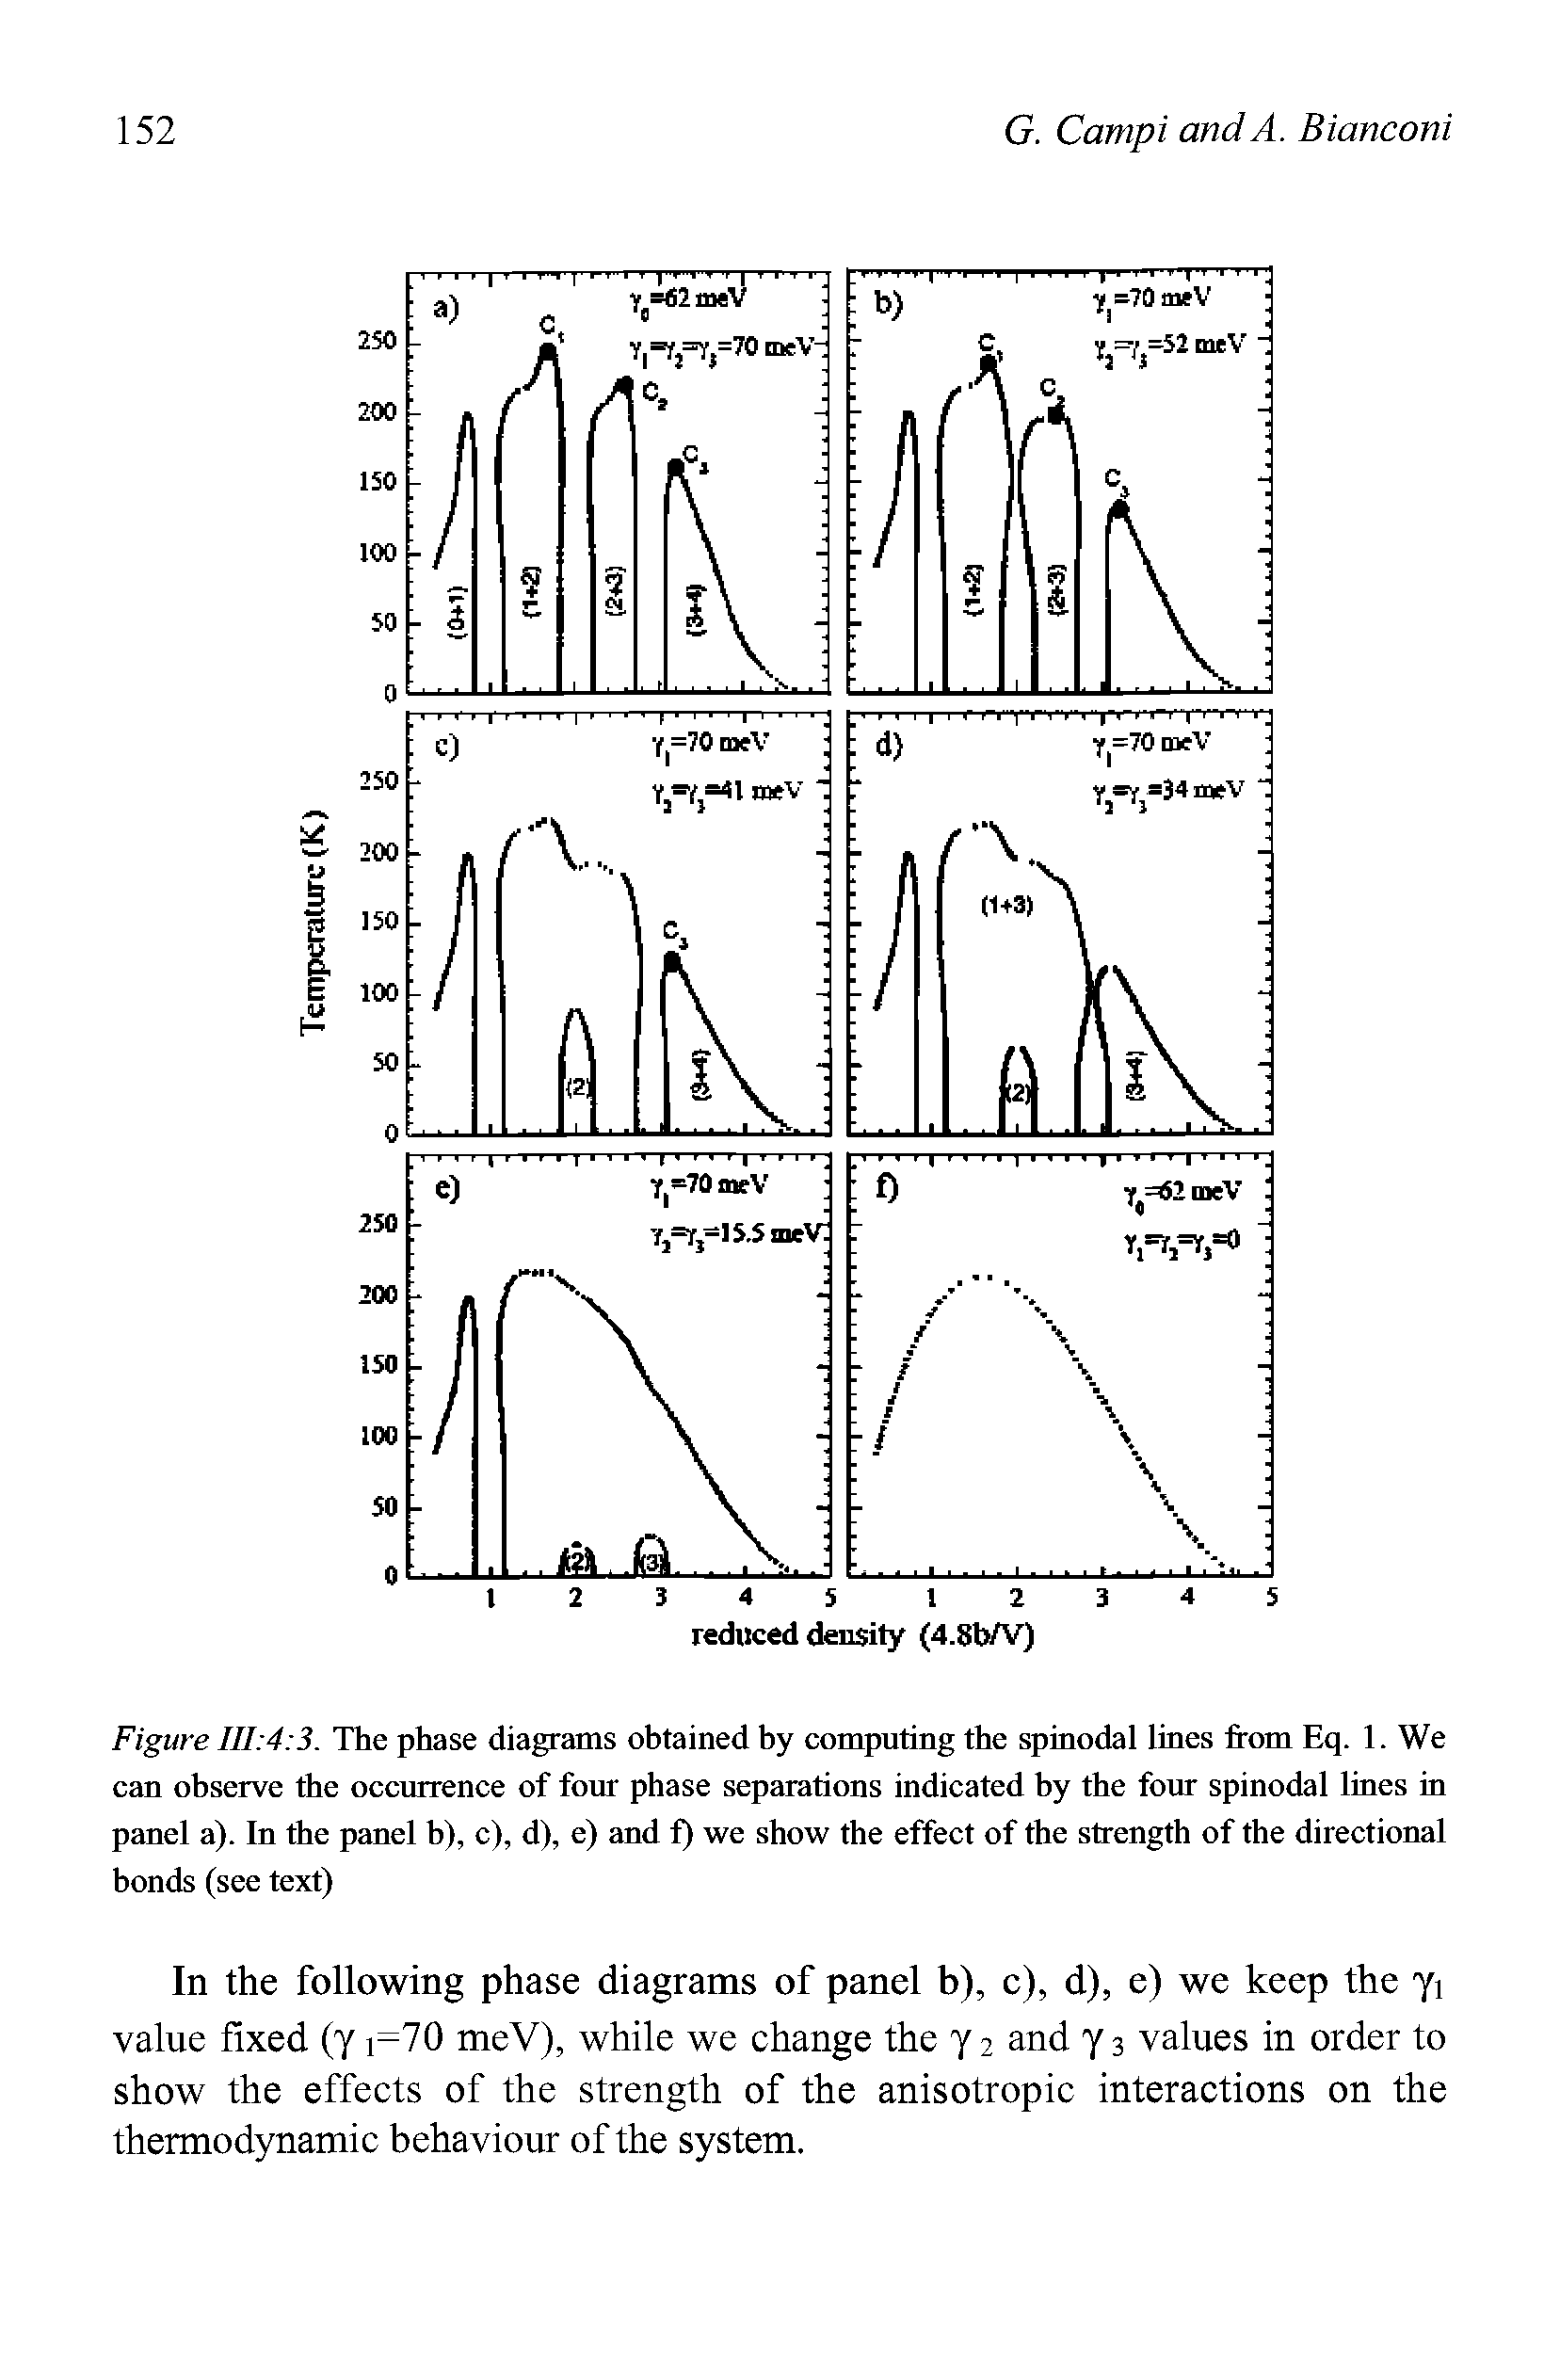 Figure 111 4 3. The phase diagrams obtained by computing the spinodal lines from Eq. 1. We can observe the occurrence of four phase separations indicated by the four spinodal lines in panel a). In the panel b), c), d), e) and f) we show the effect of the strength of the directional bonds (see text)...